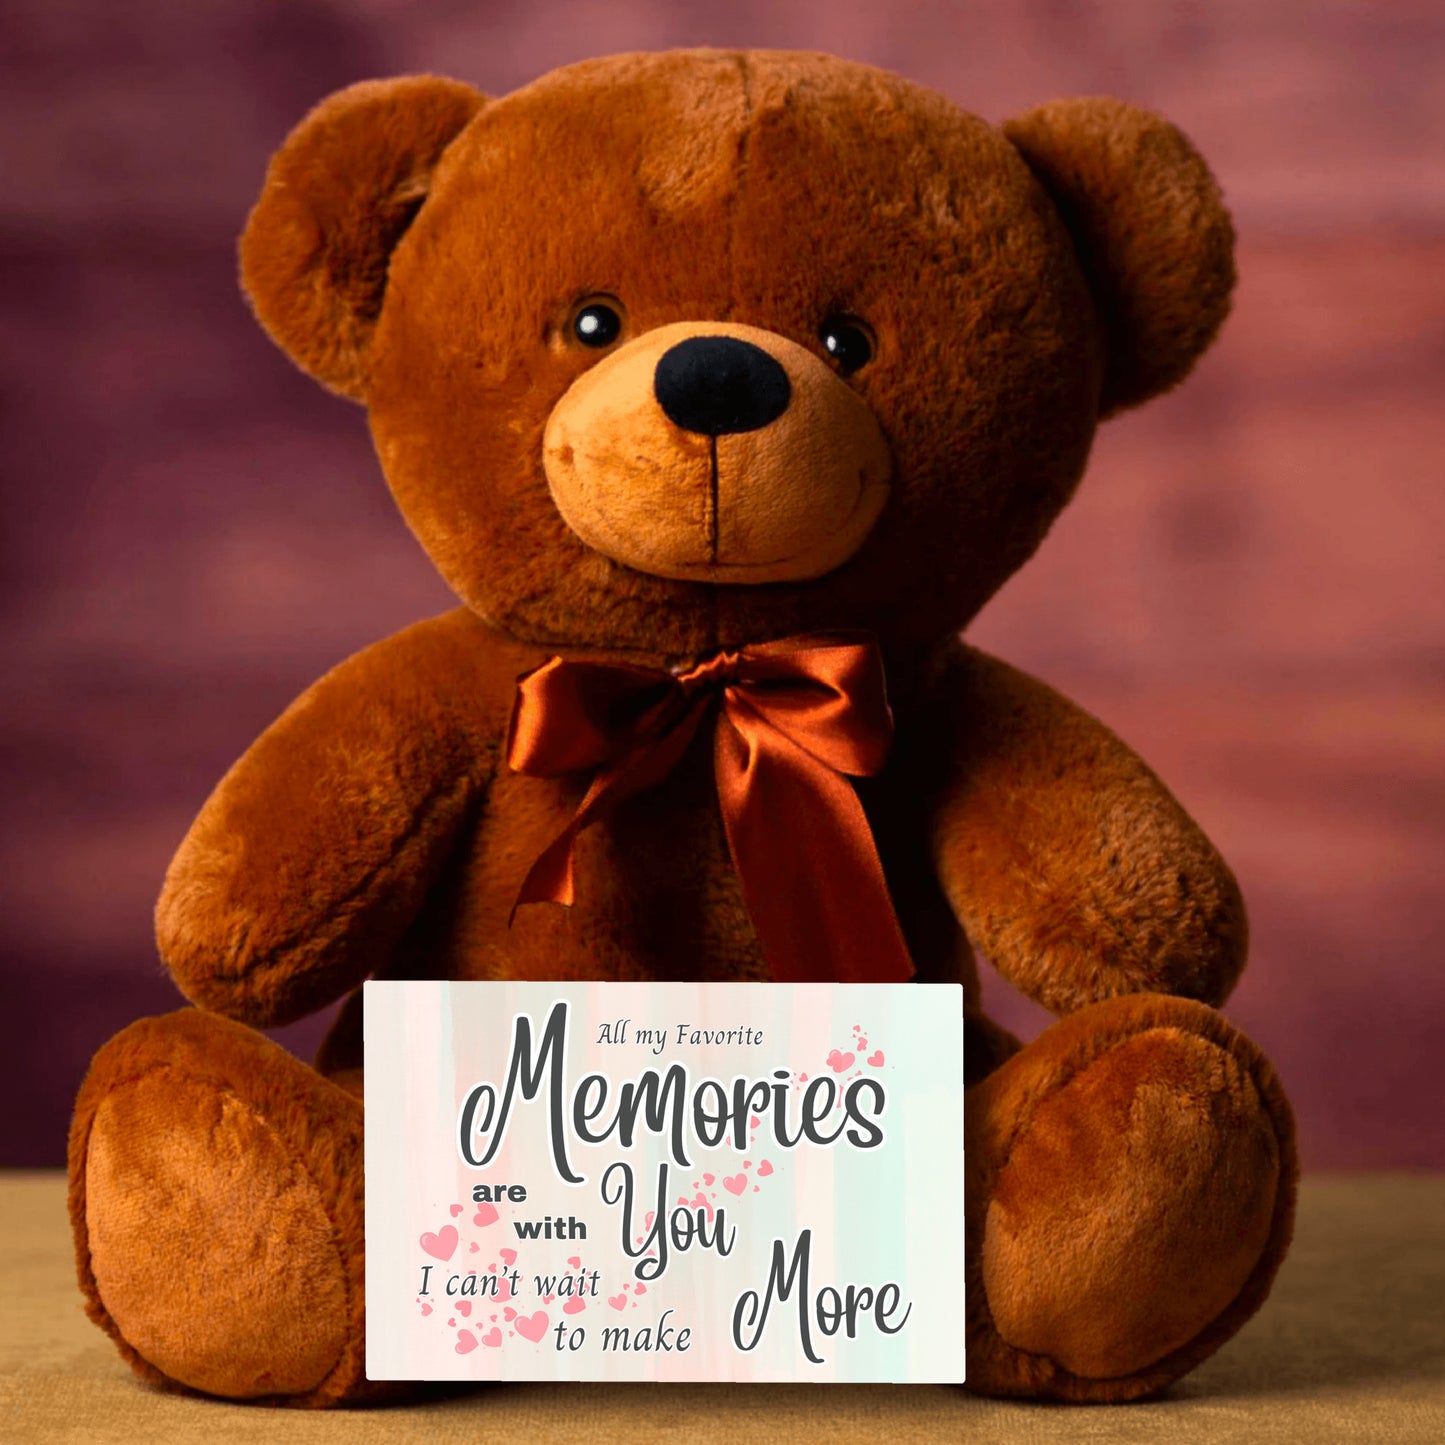 All my favorite Memories are of you, I can't wait to make more - Teddy Bear